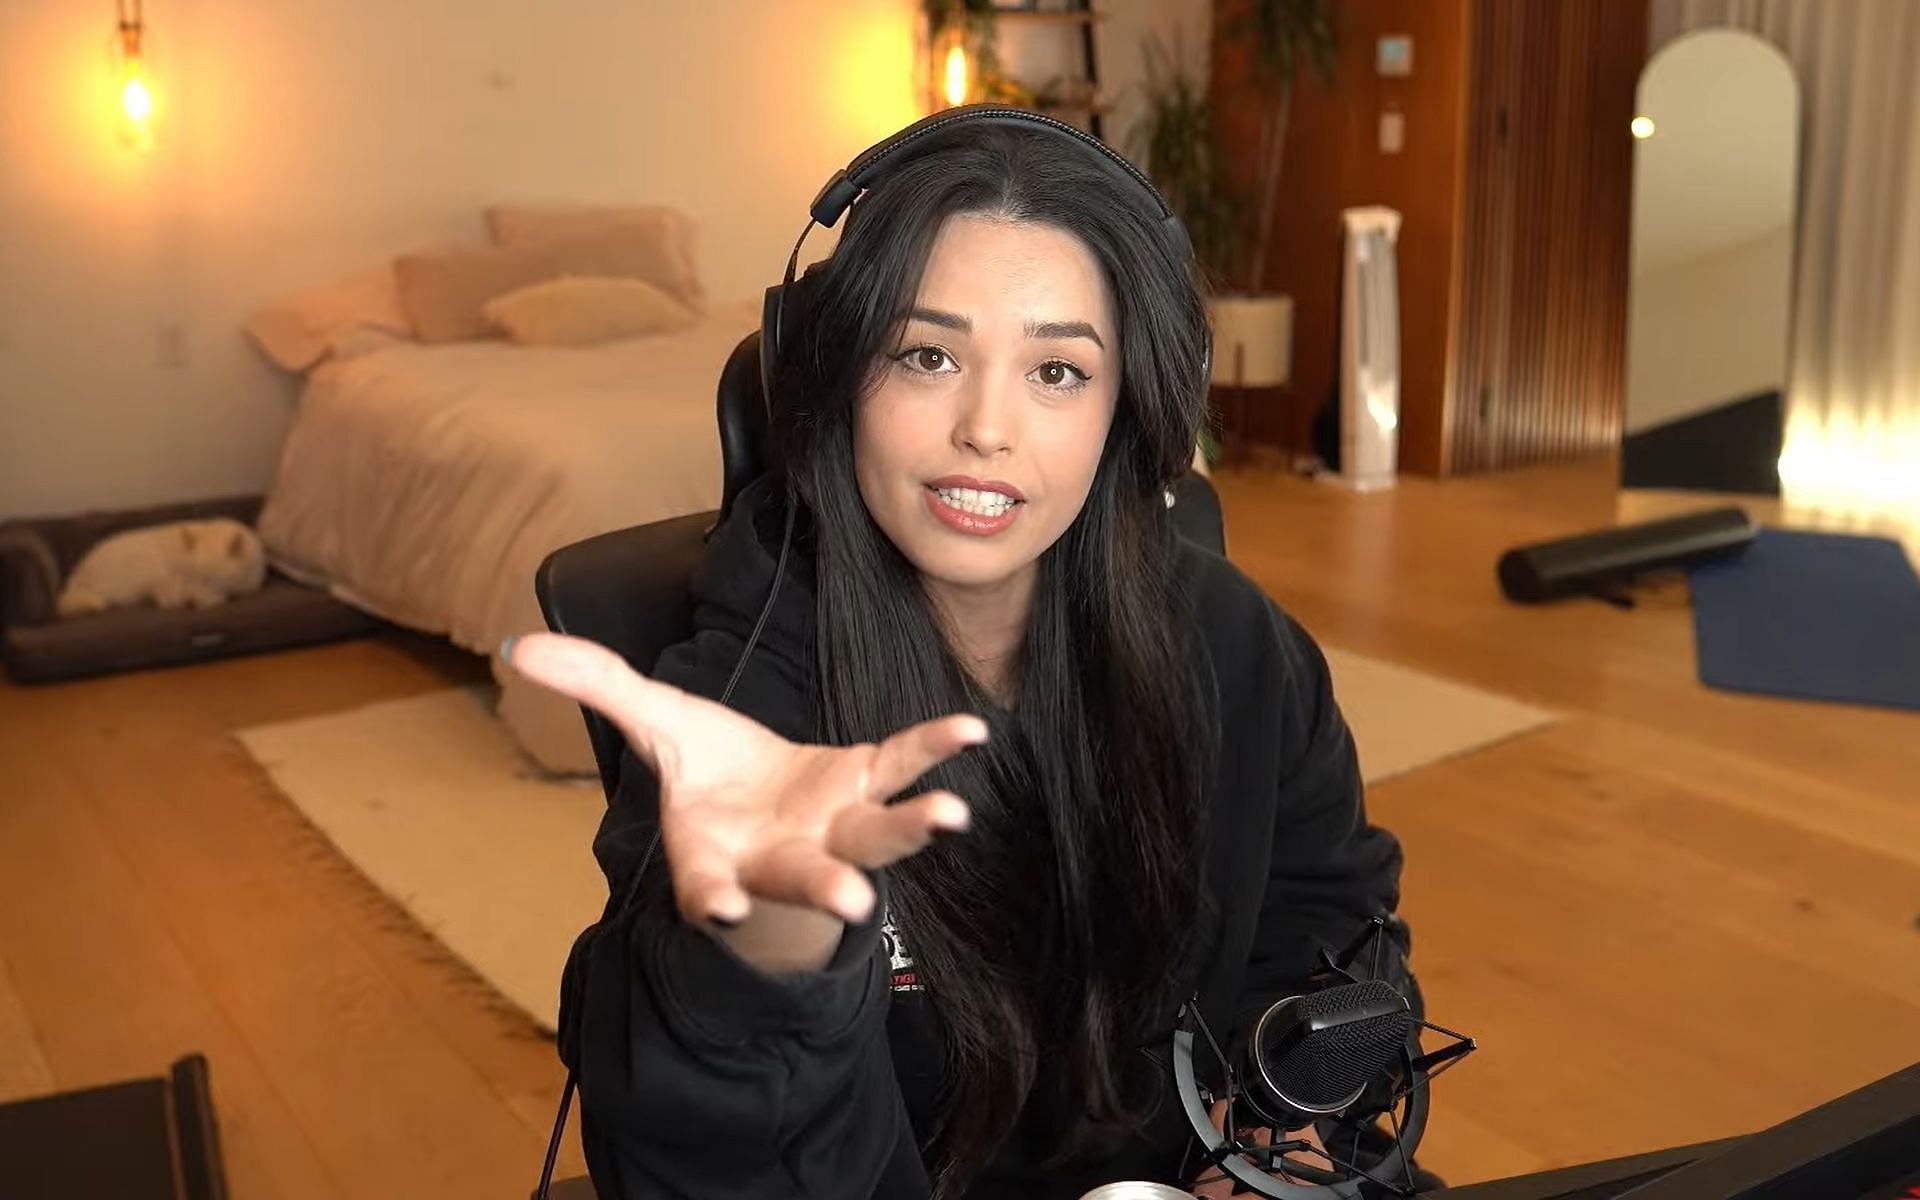 Chatting with Valkyrae about authentic gaming and streamer culture in  Apple's The Family Plan